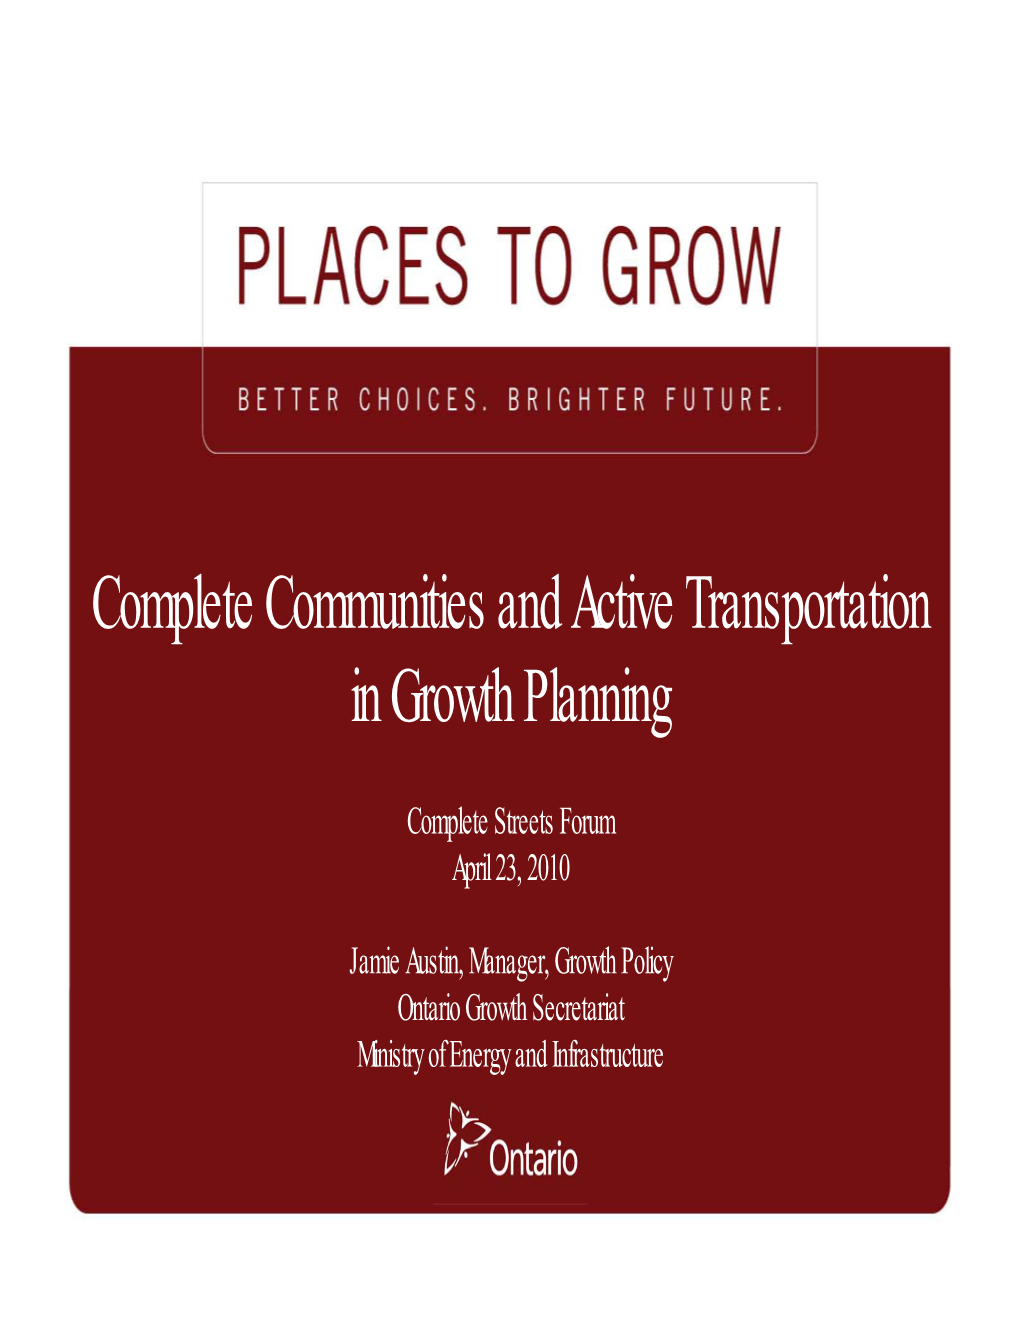 Complete Communities and Active Transportation in Growth Planning